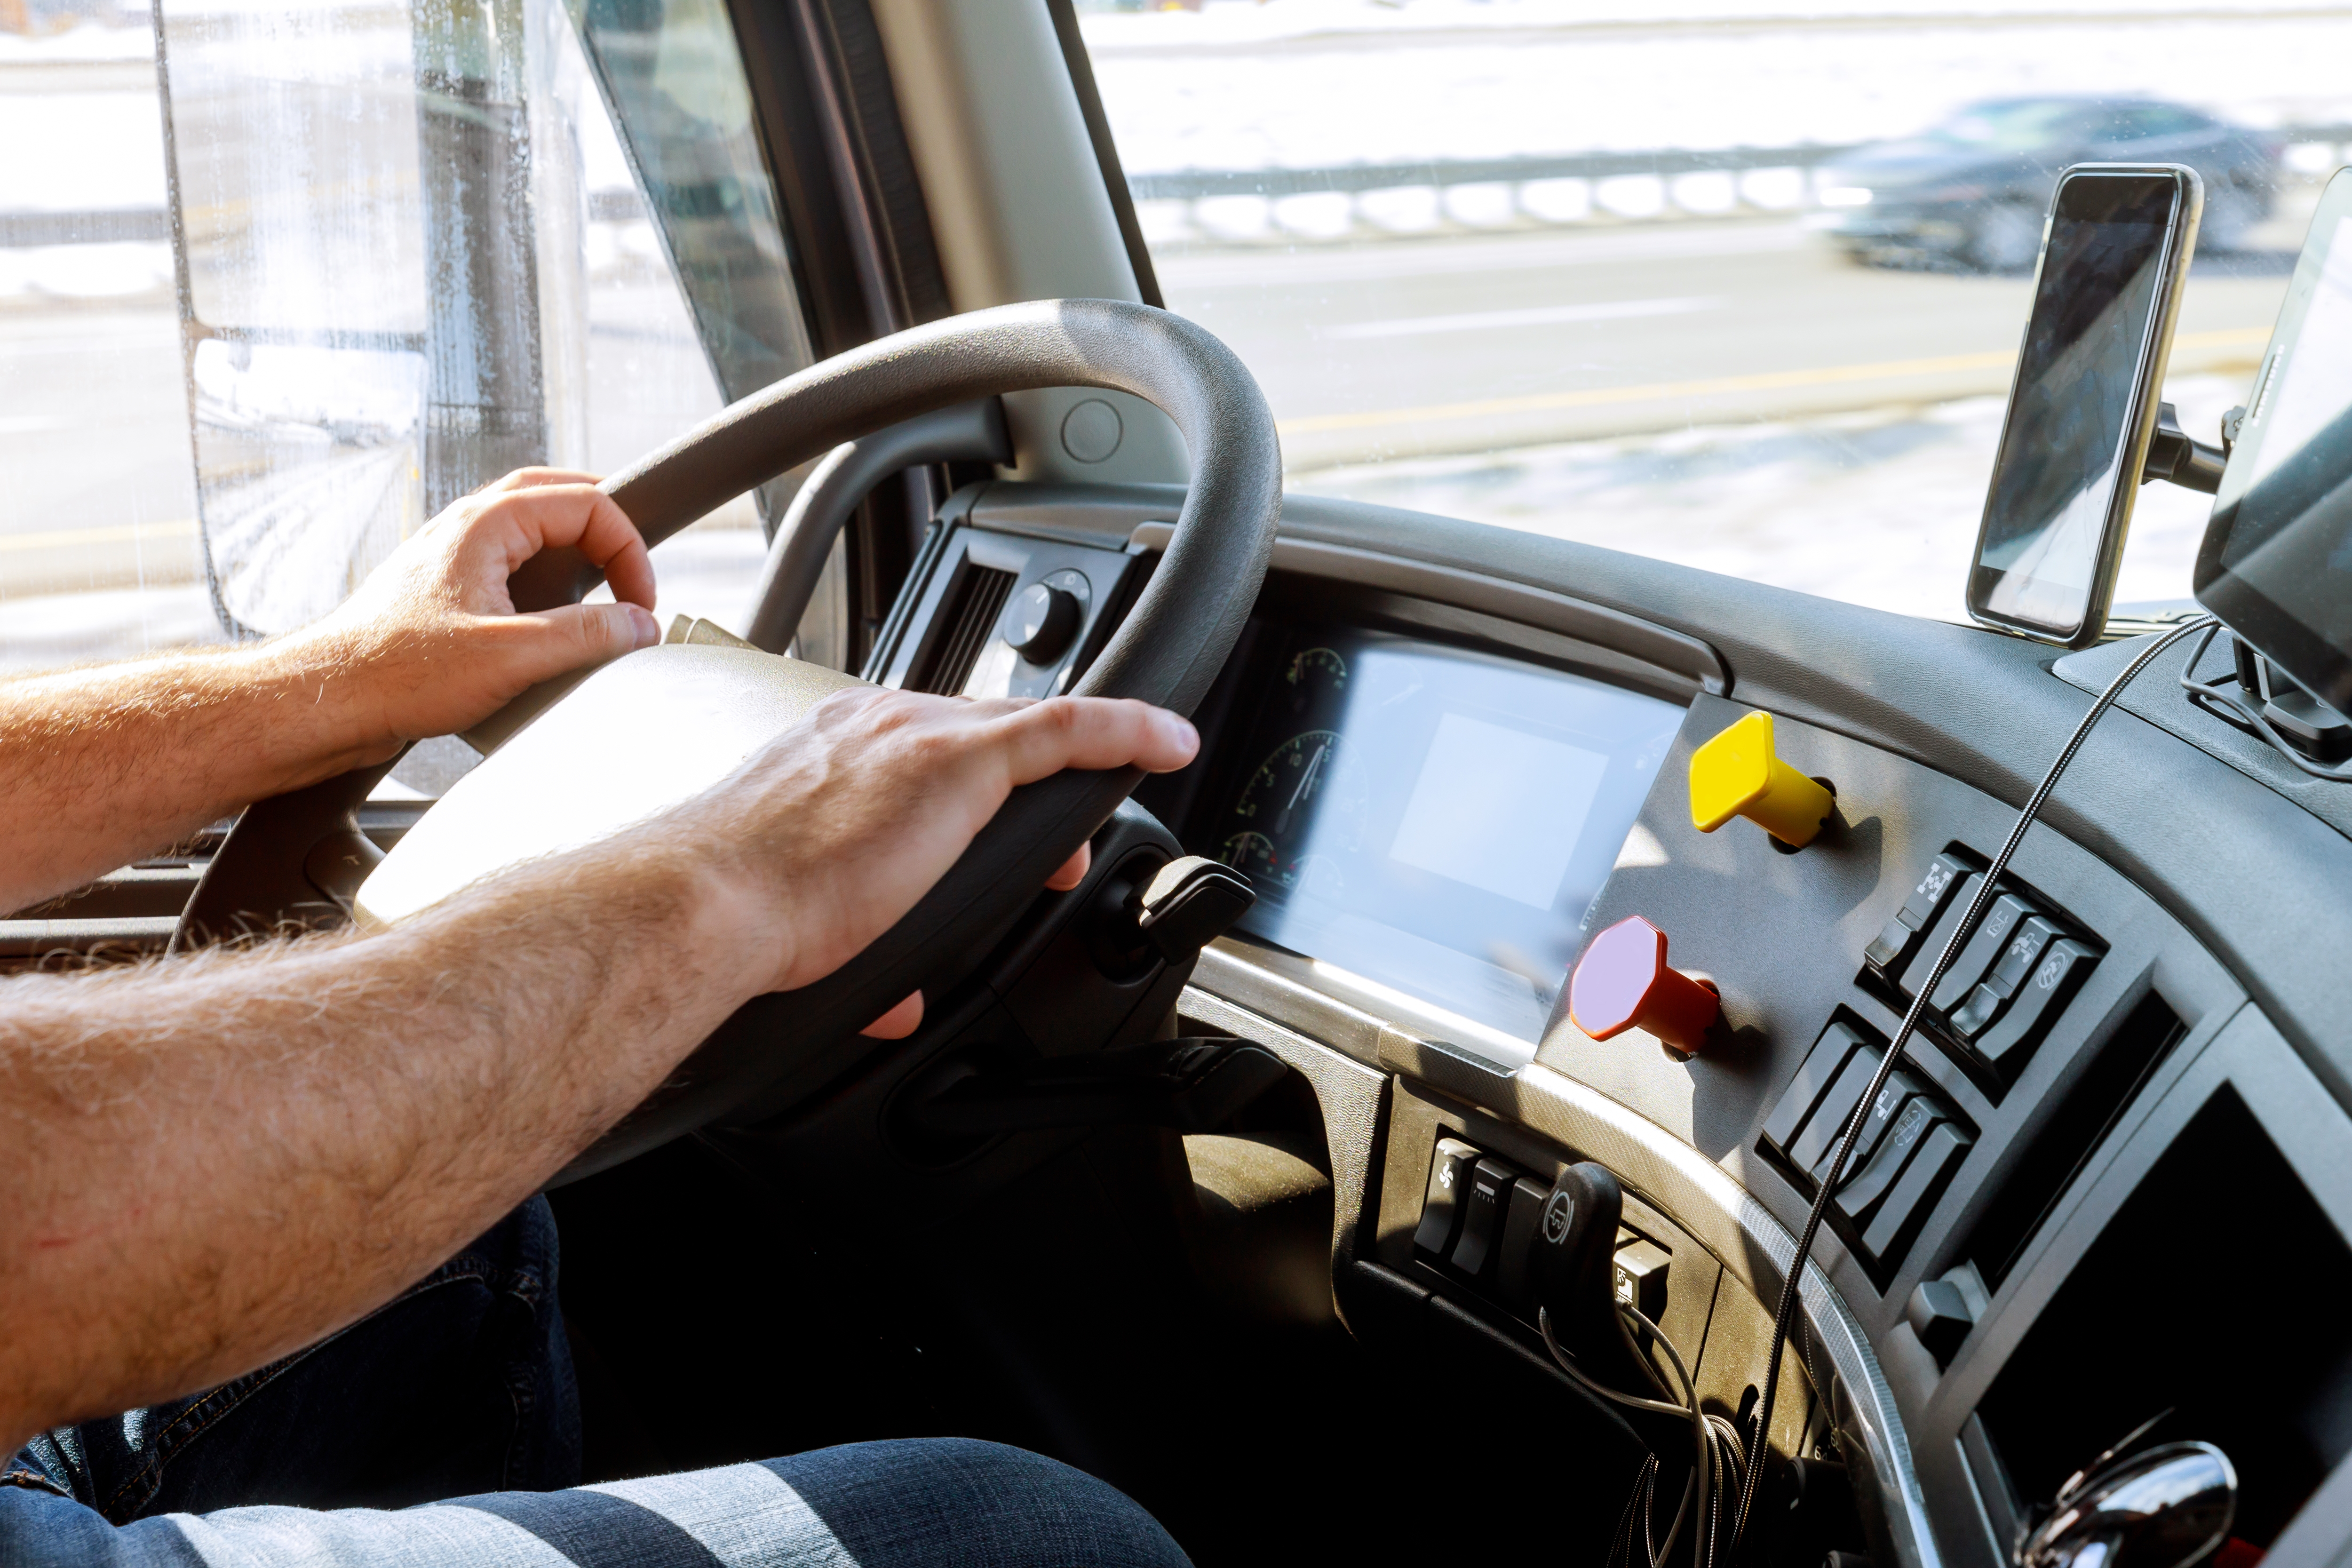 In 2017, the Federal Motor Carrier Safety Administration (FMCSA) mandated that all commercial truck drivers use electronic logs to track the hours they spend on duty and behind the wheel.